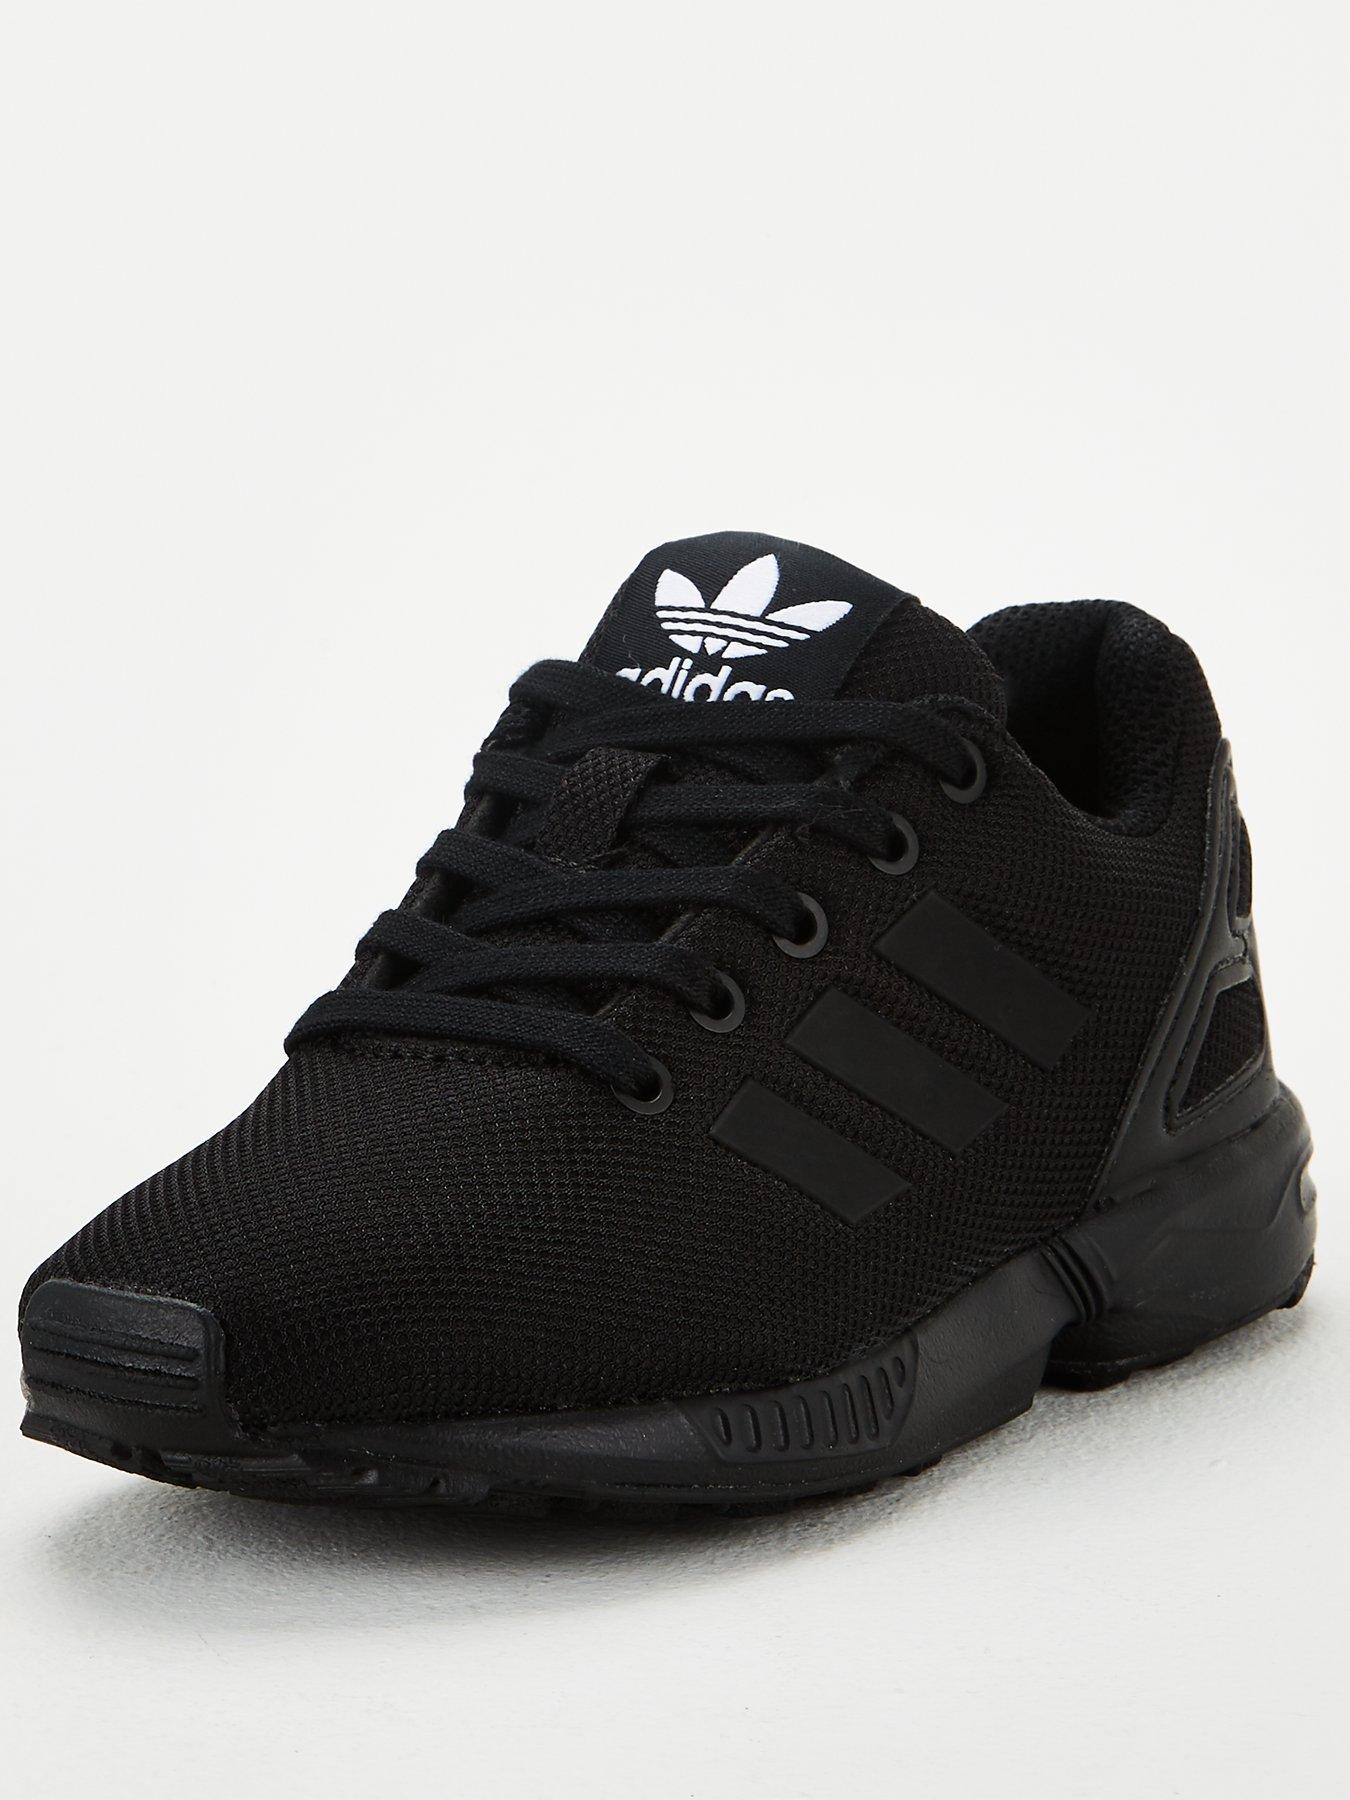 adidas trainers toddlers